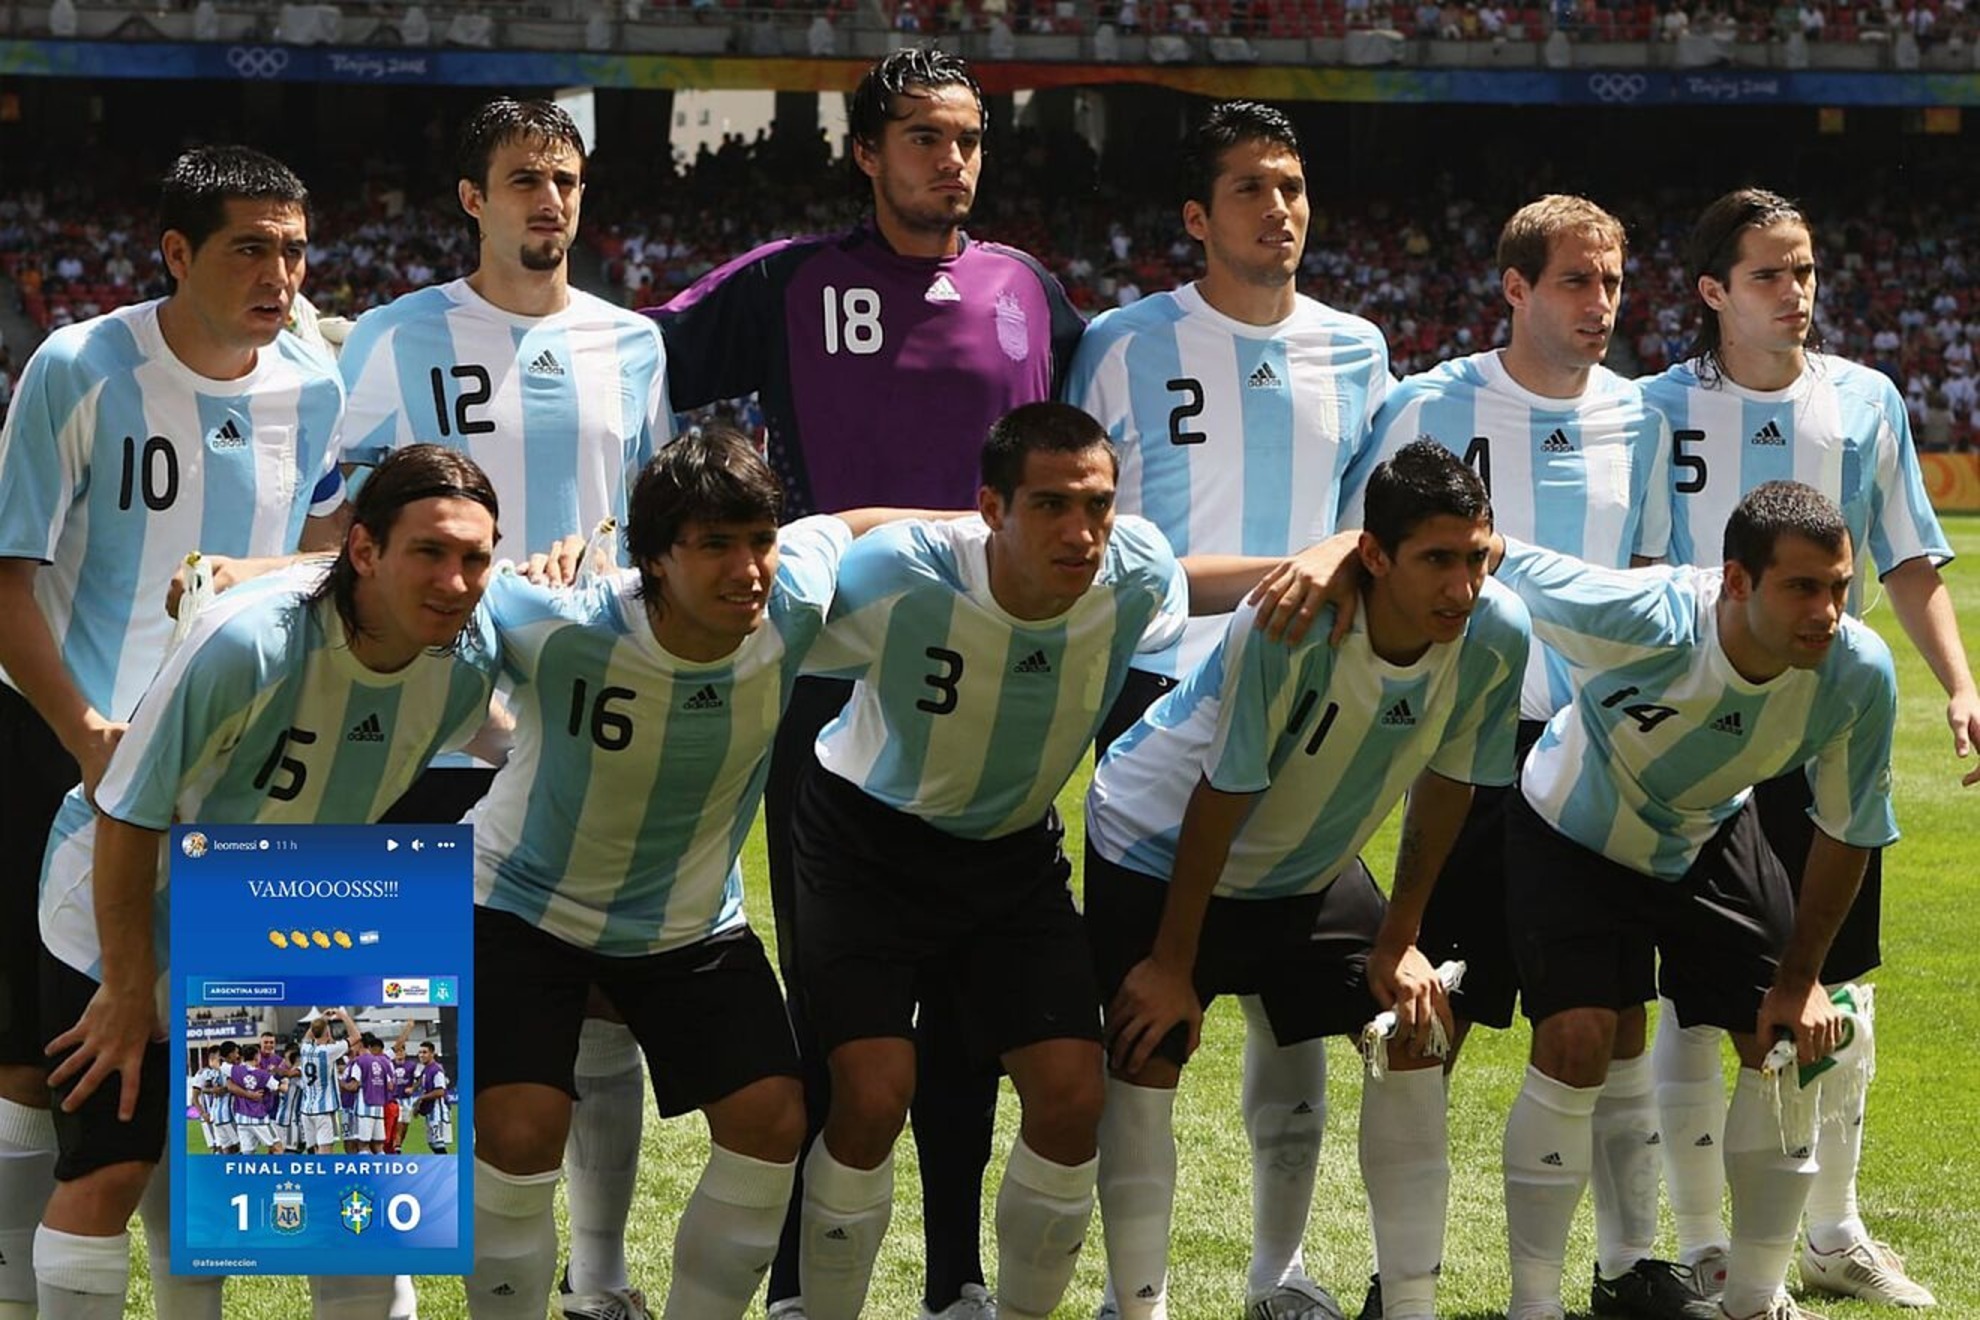 The Argentine team that won gold in Beijing 2008 and Messis post.